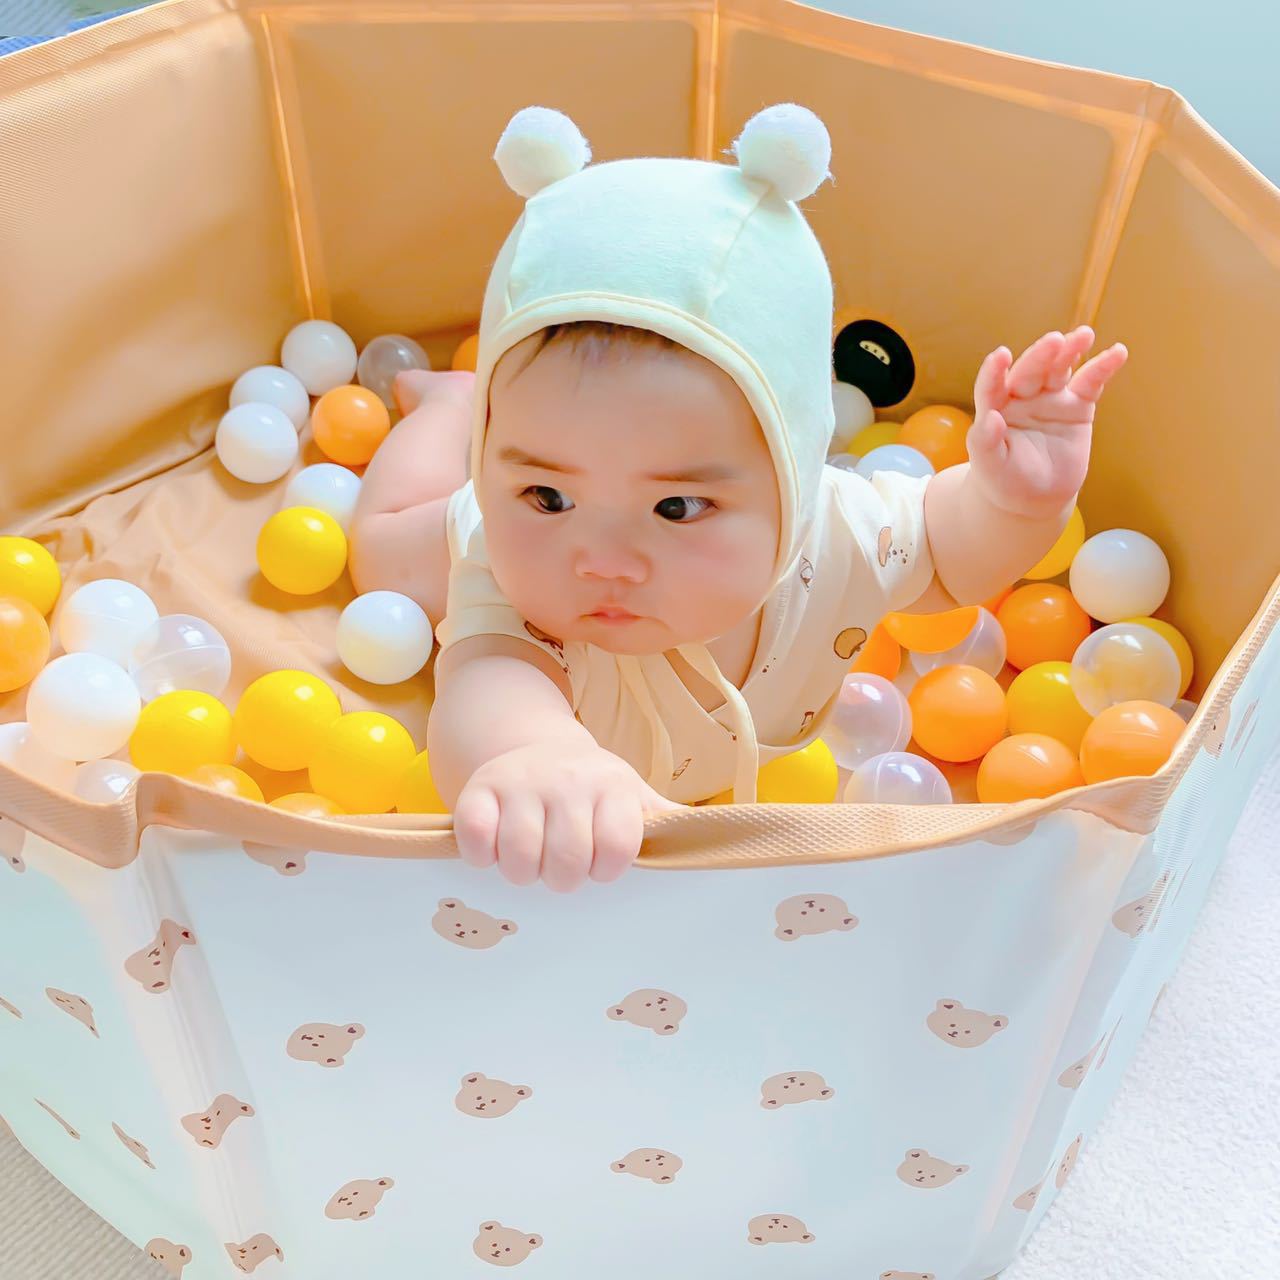 the republic of korea ins indoor children Ball pool Storage enclosure baby Toys Ball pool Foldable Swimming Paddling pool